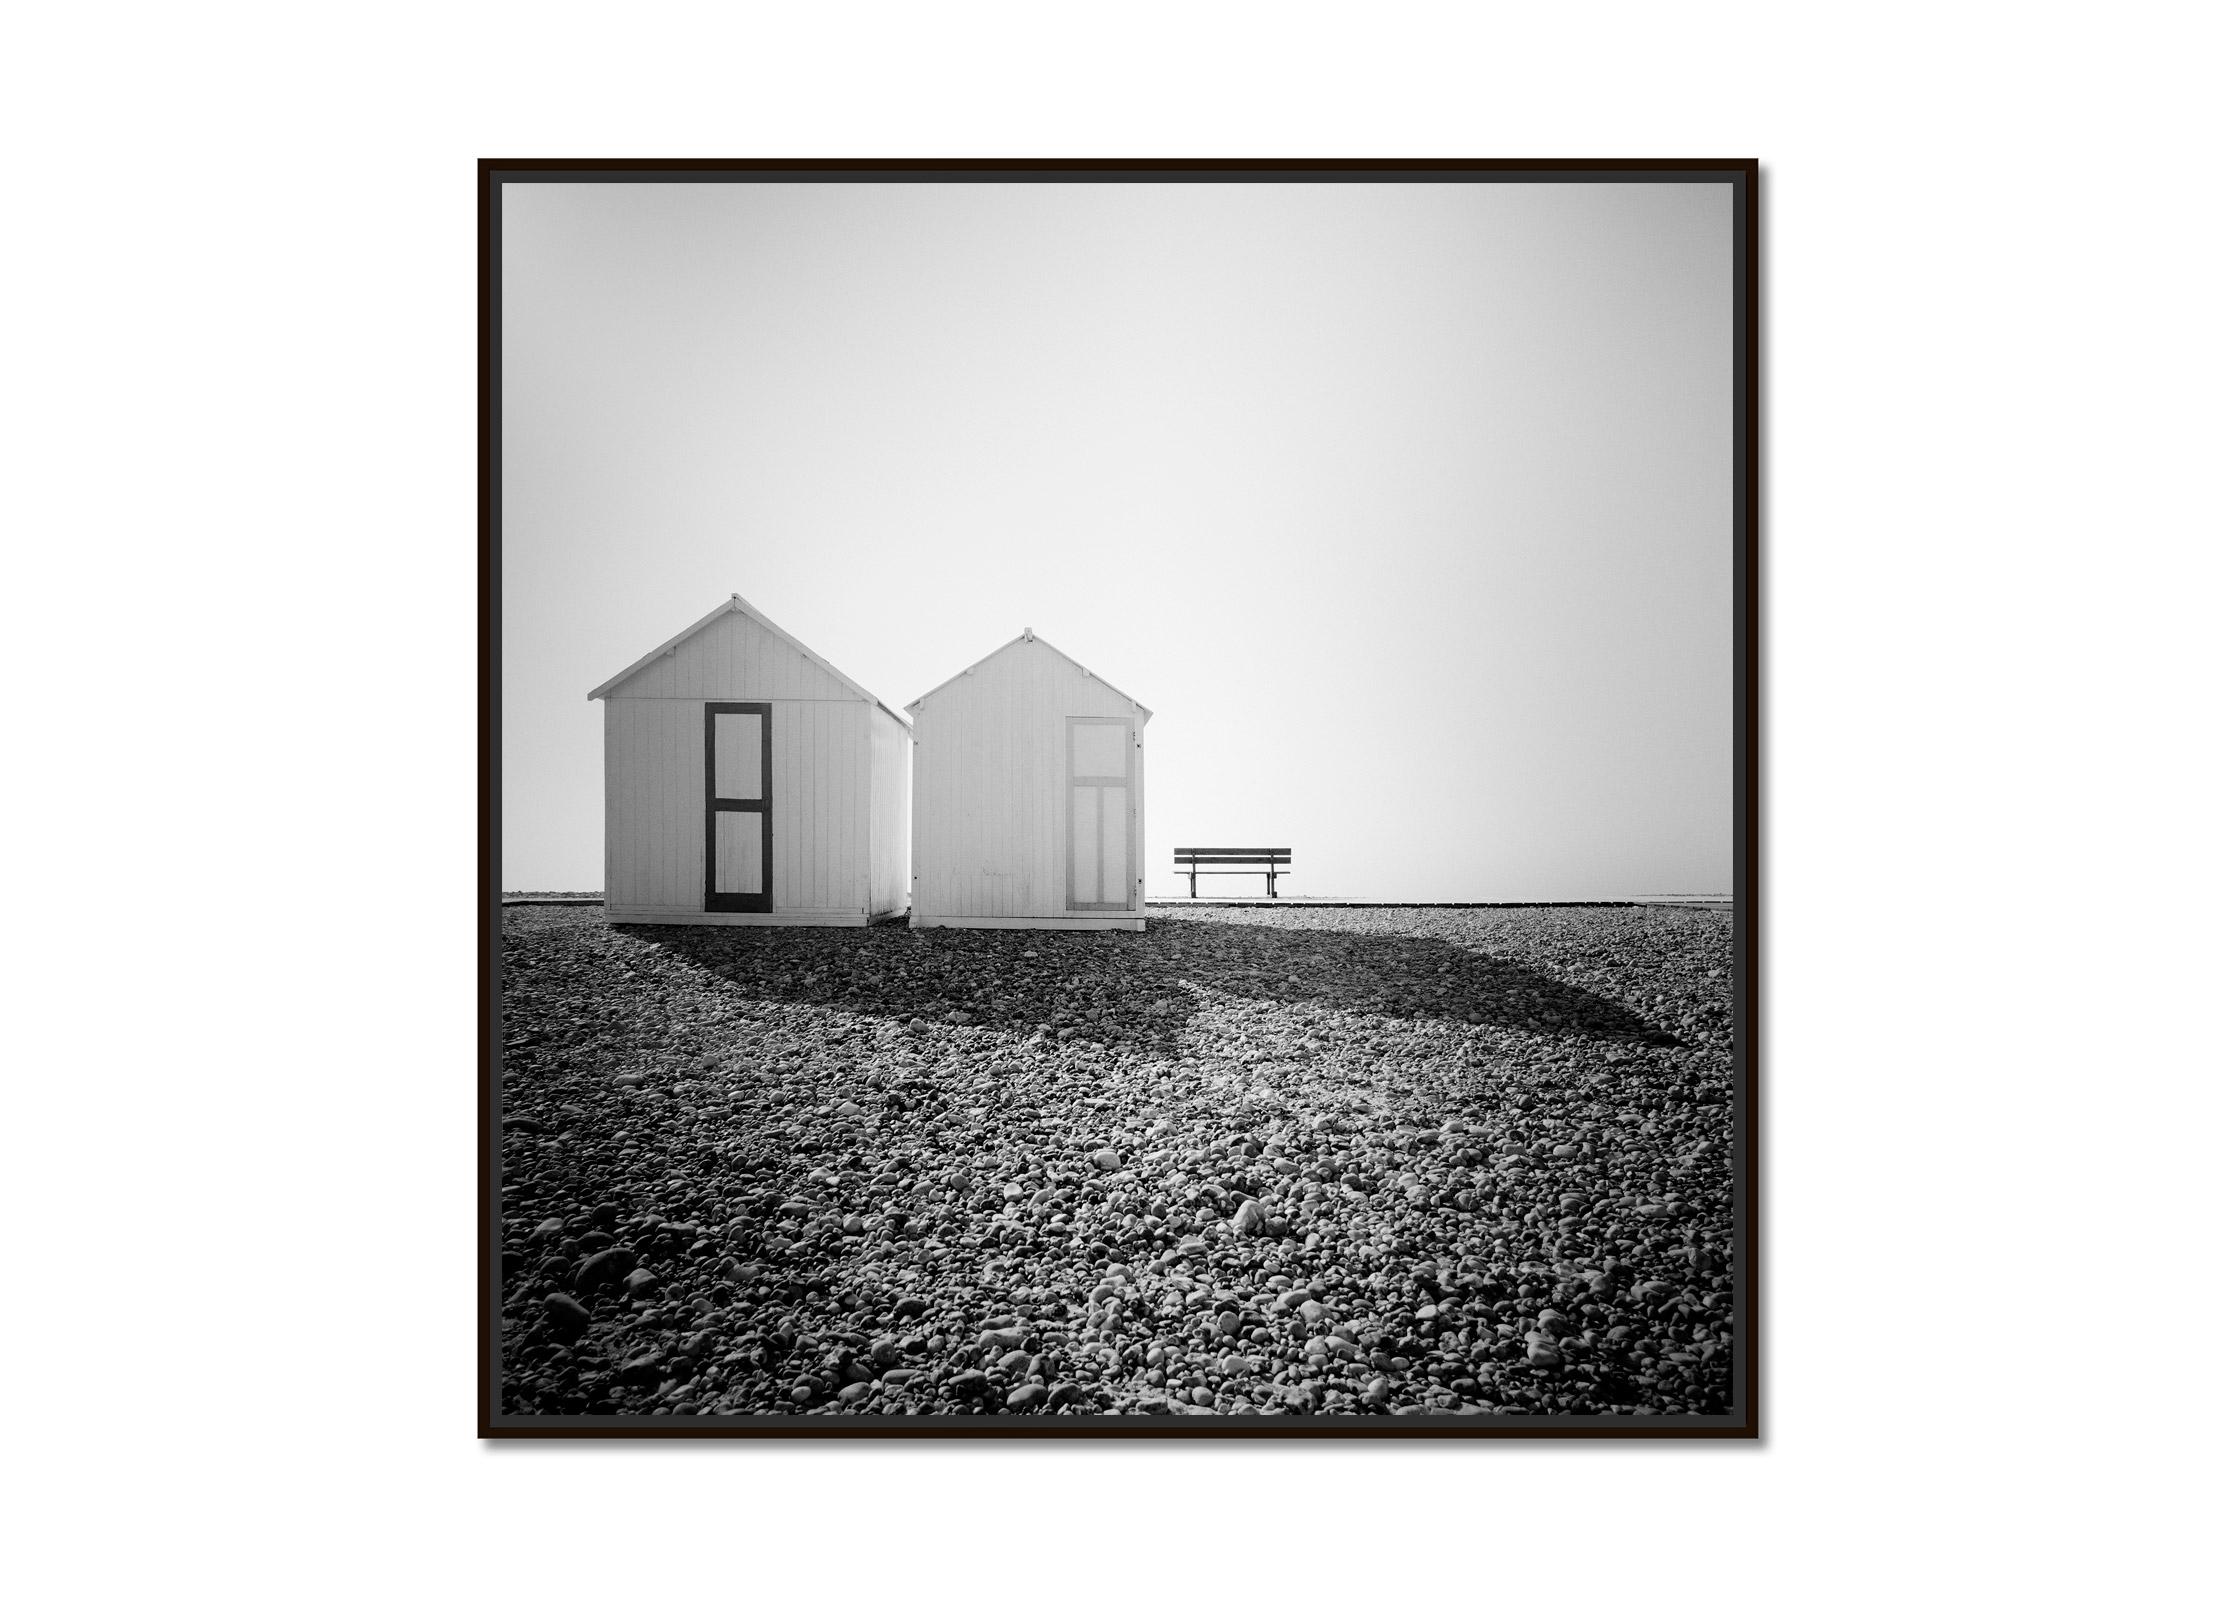 Beach Huts France minimalist black and white fine art landscape photography - Photograph by Gerald Berghammer